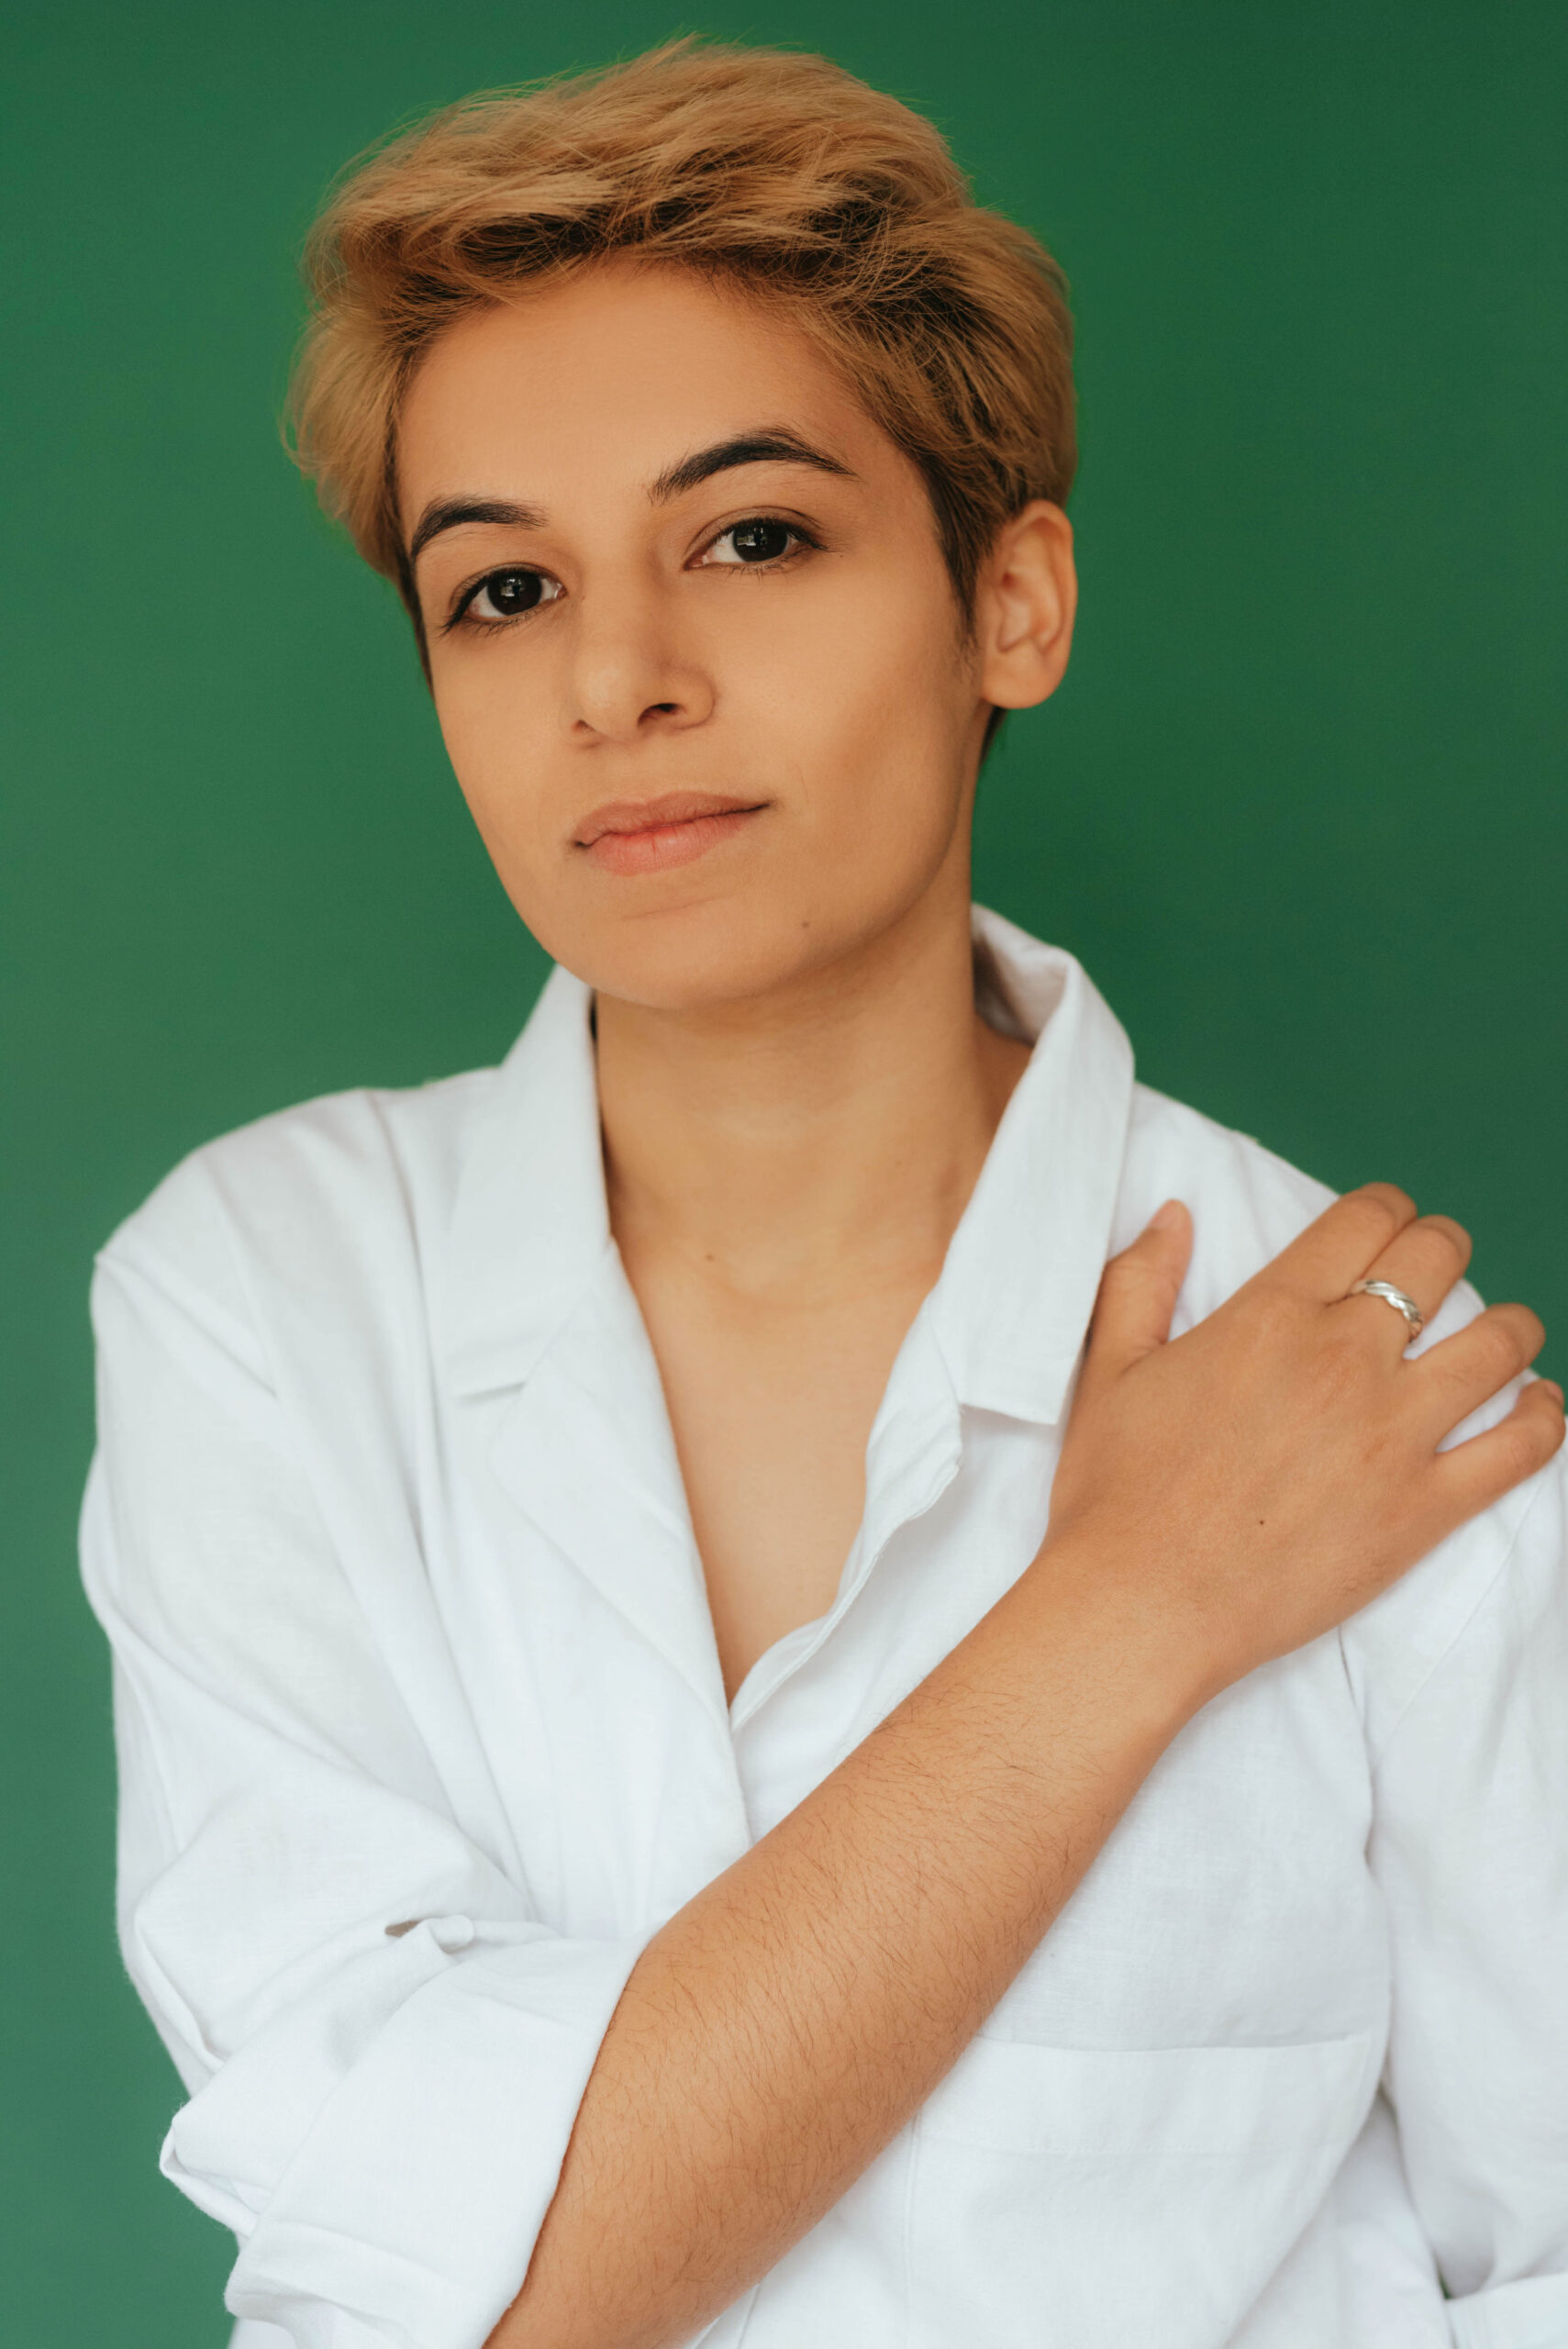 Photo of Emerging Creators Unit Director Erum Khan - they have short dyed blond hair, and wear a white button down shirt. Their right hand rests on their left shoulder.